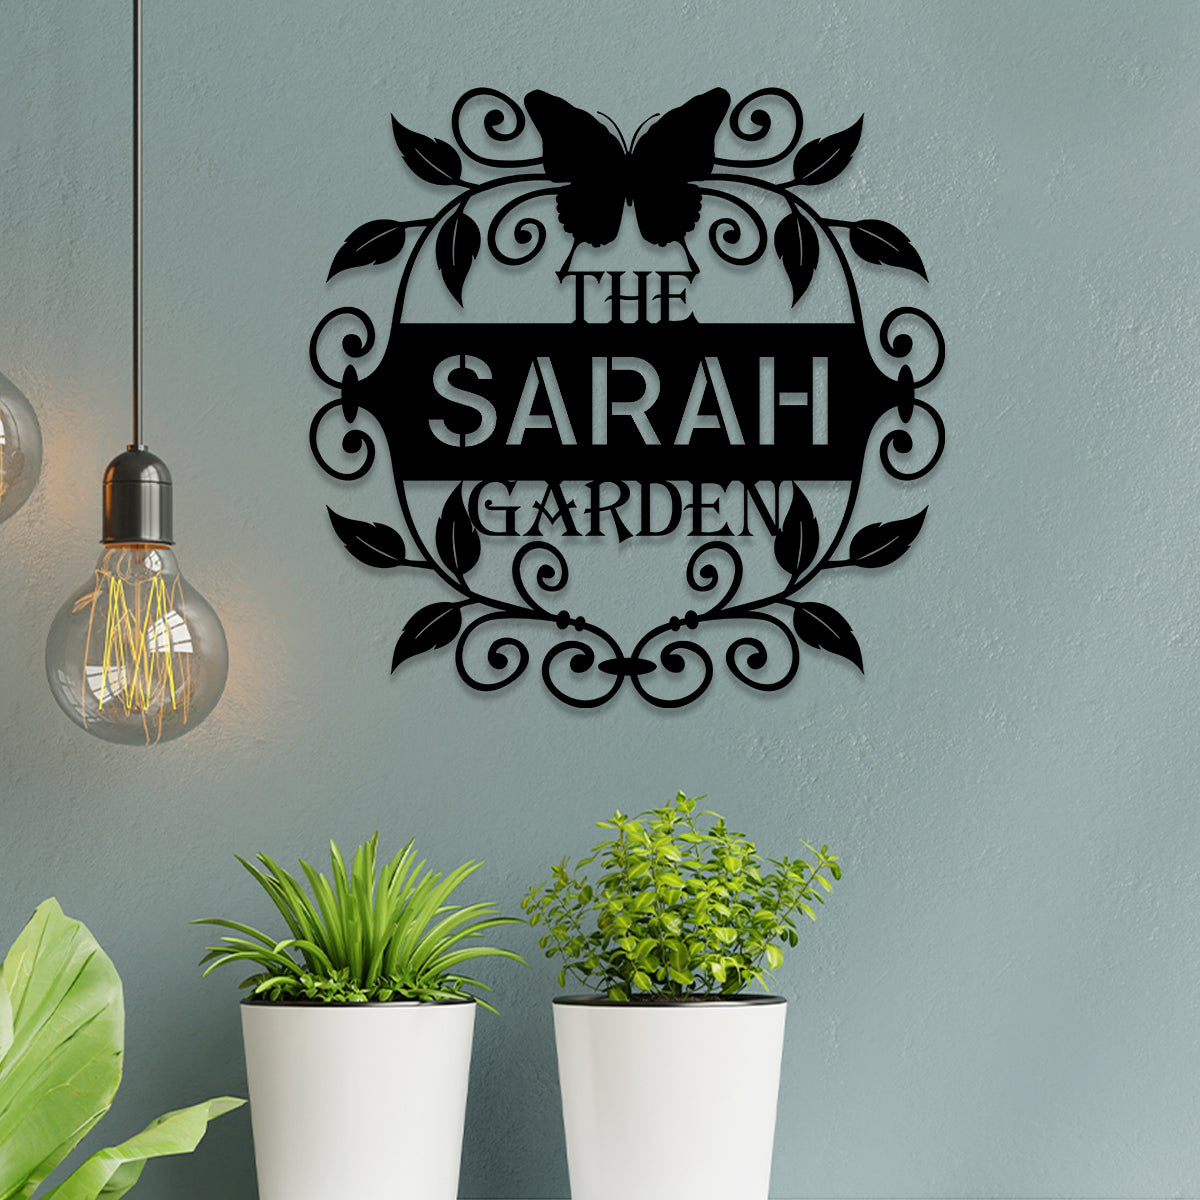 Personalized Metal Garden Sign, Home Decor, Wedding Gift For Her, Gardening Lovers